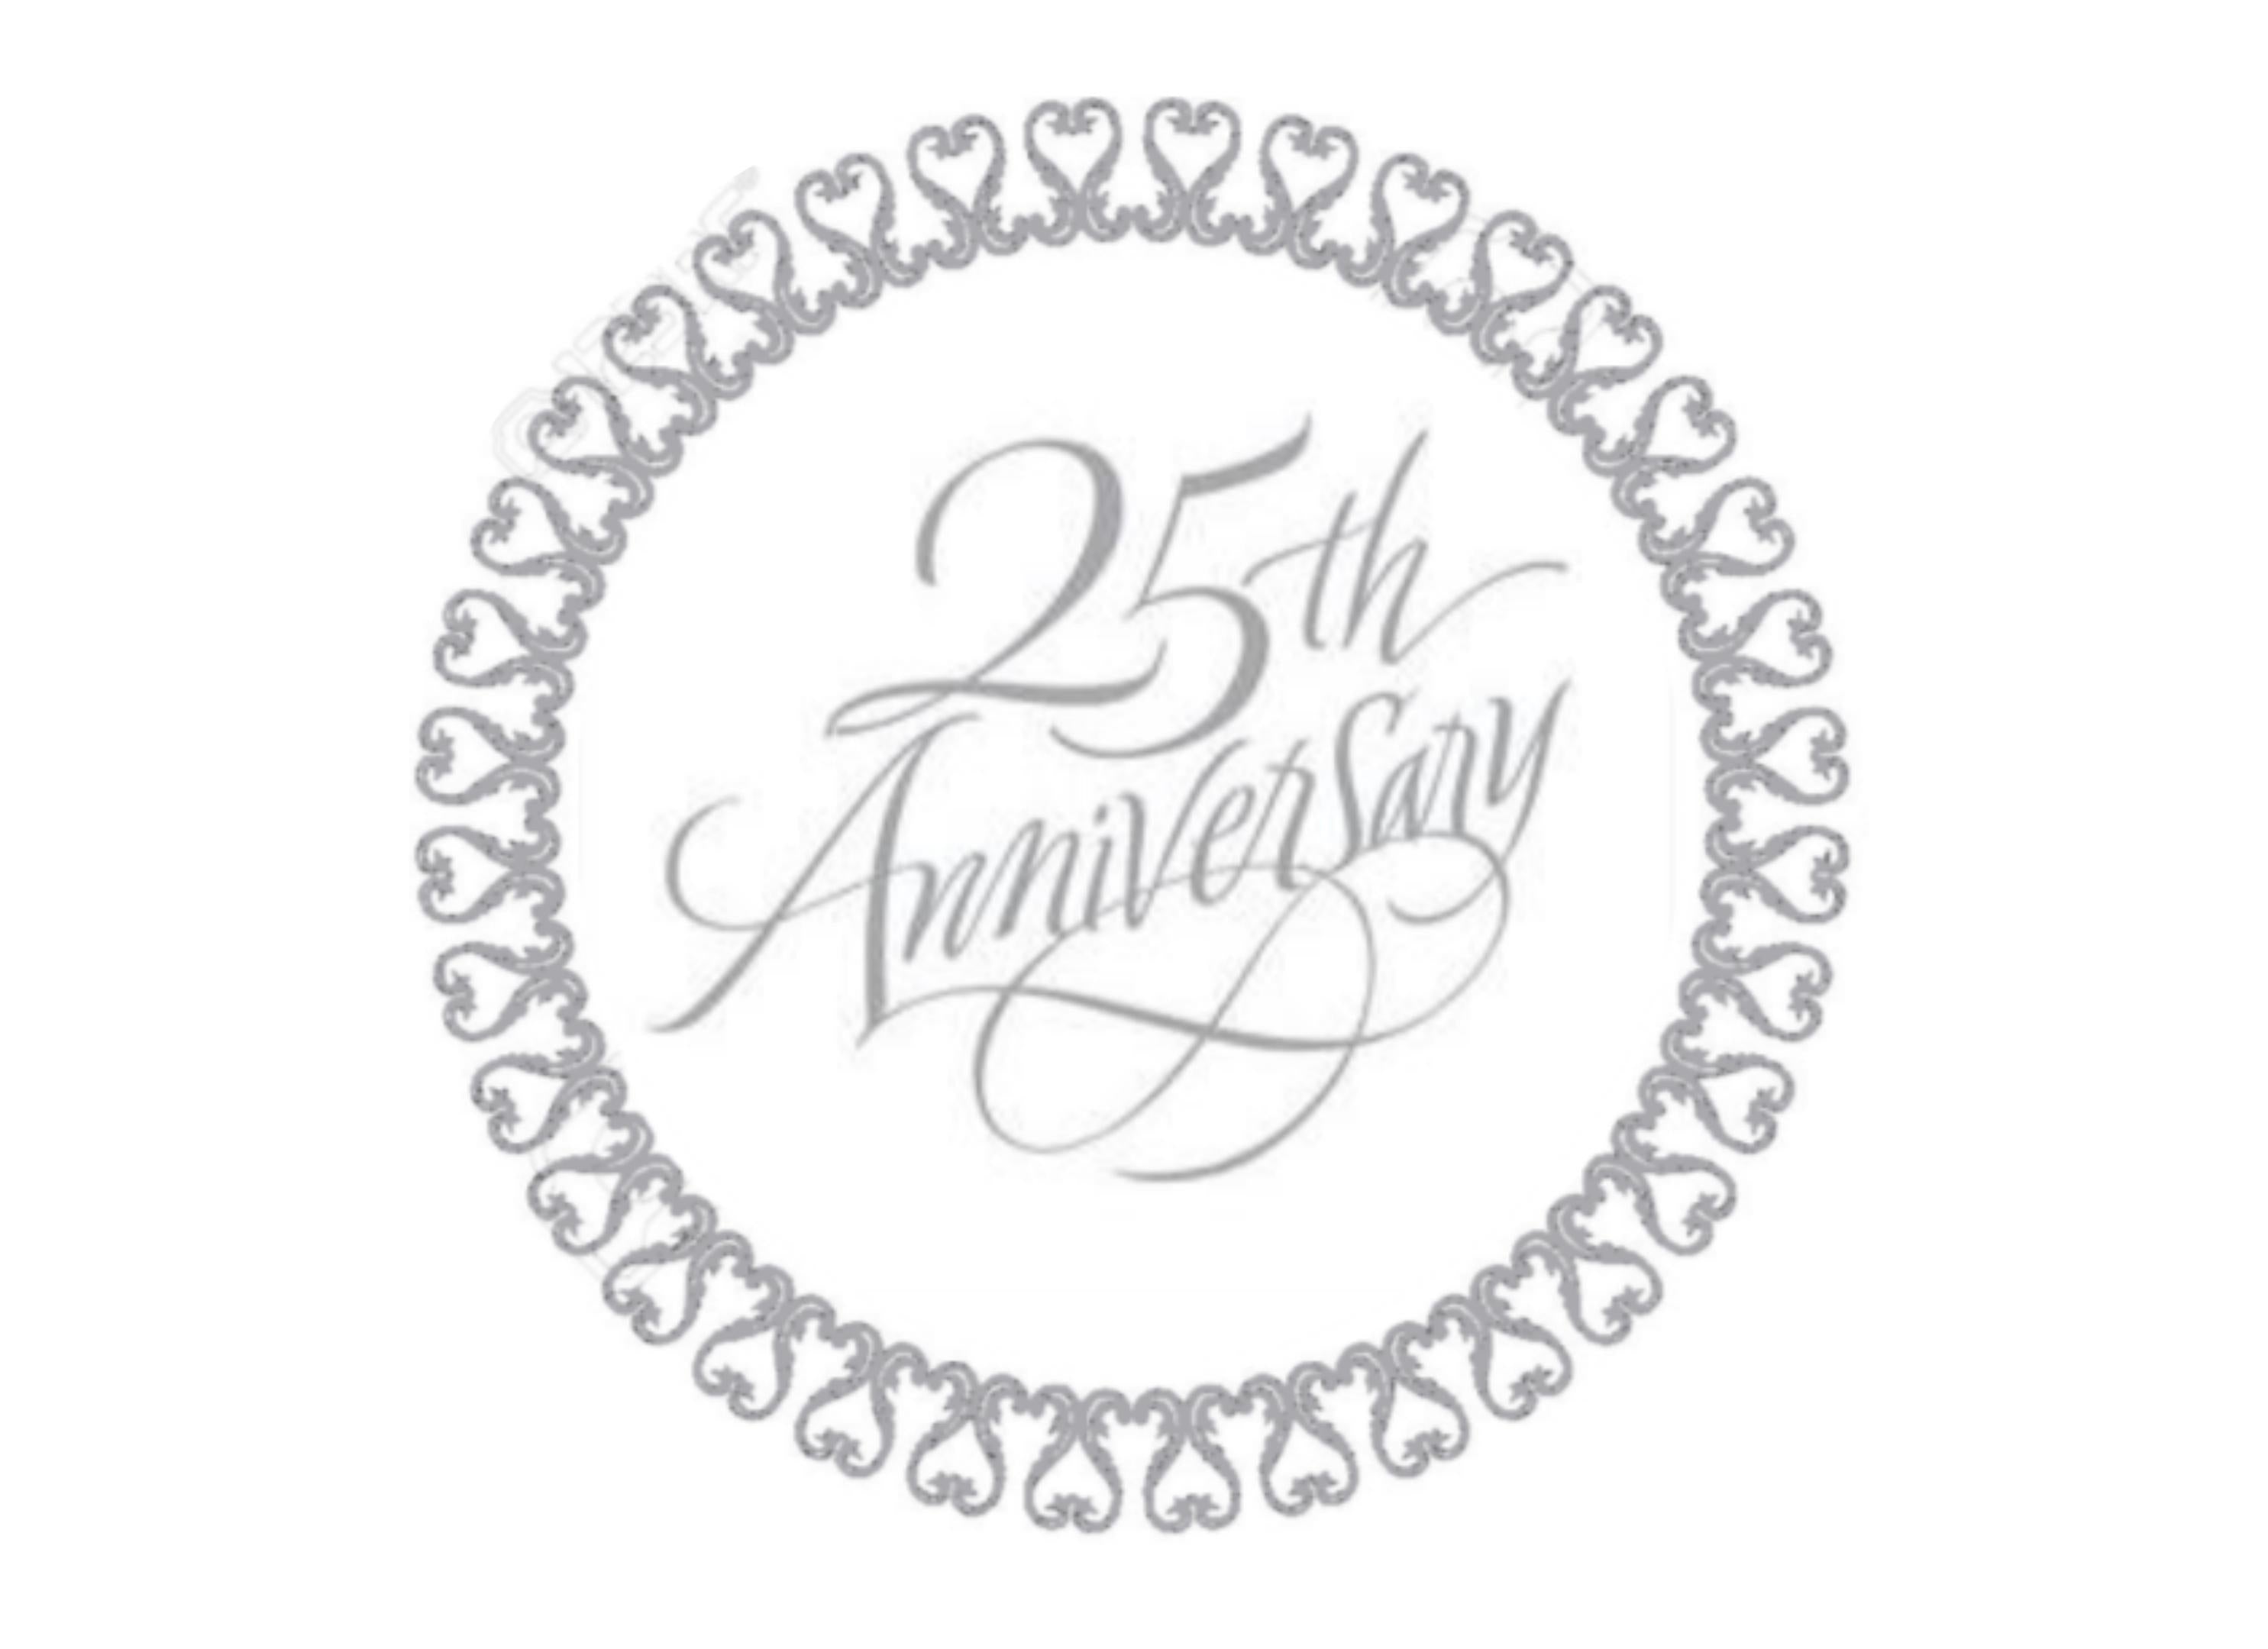 7.5" cake topper for silver anniversary